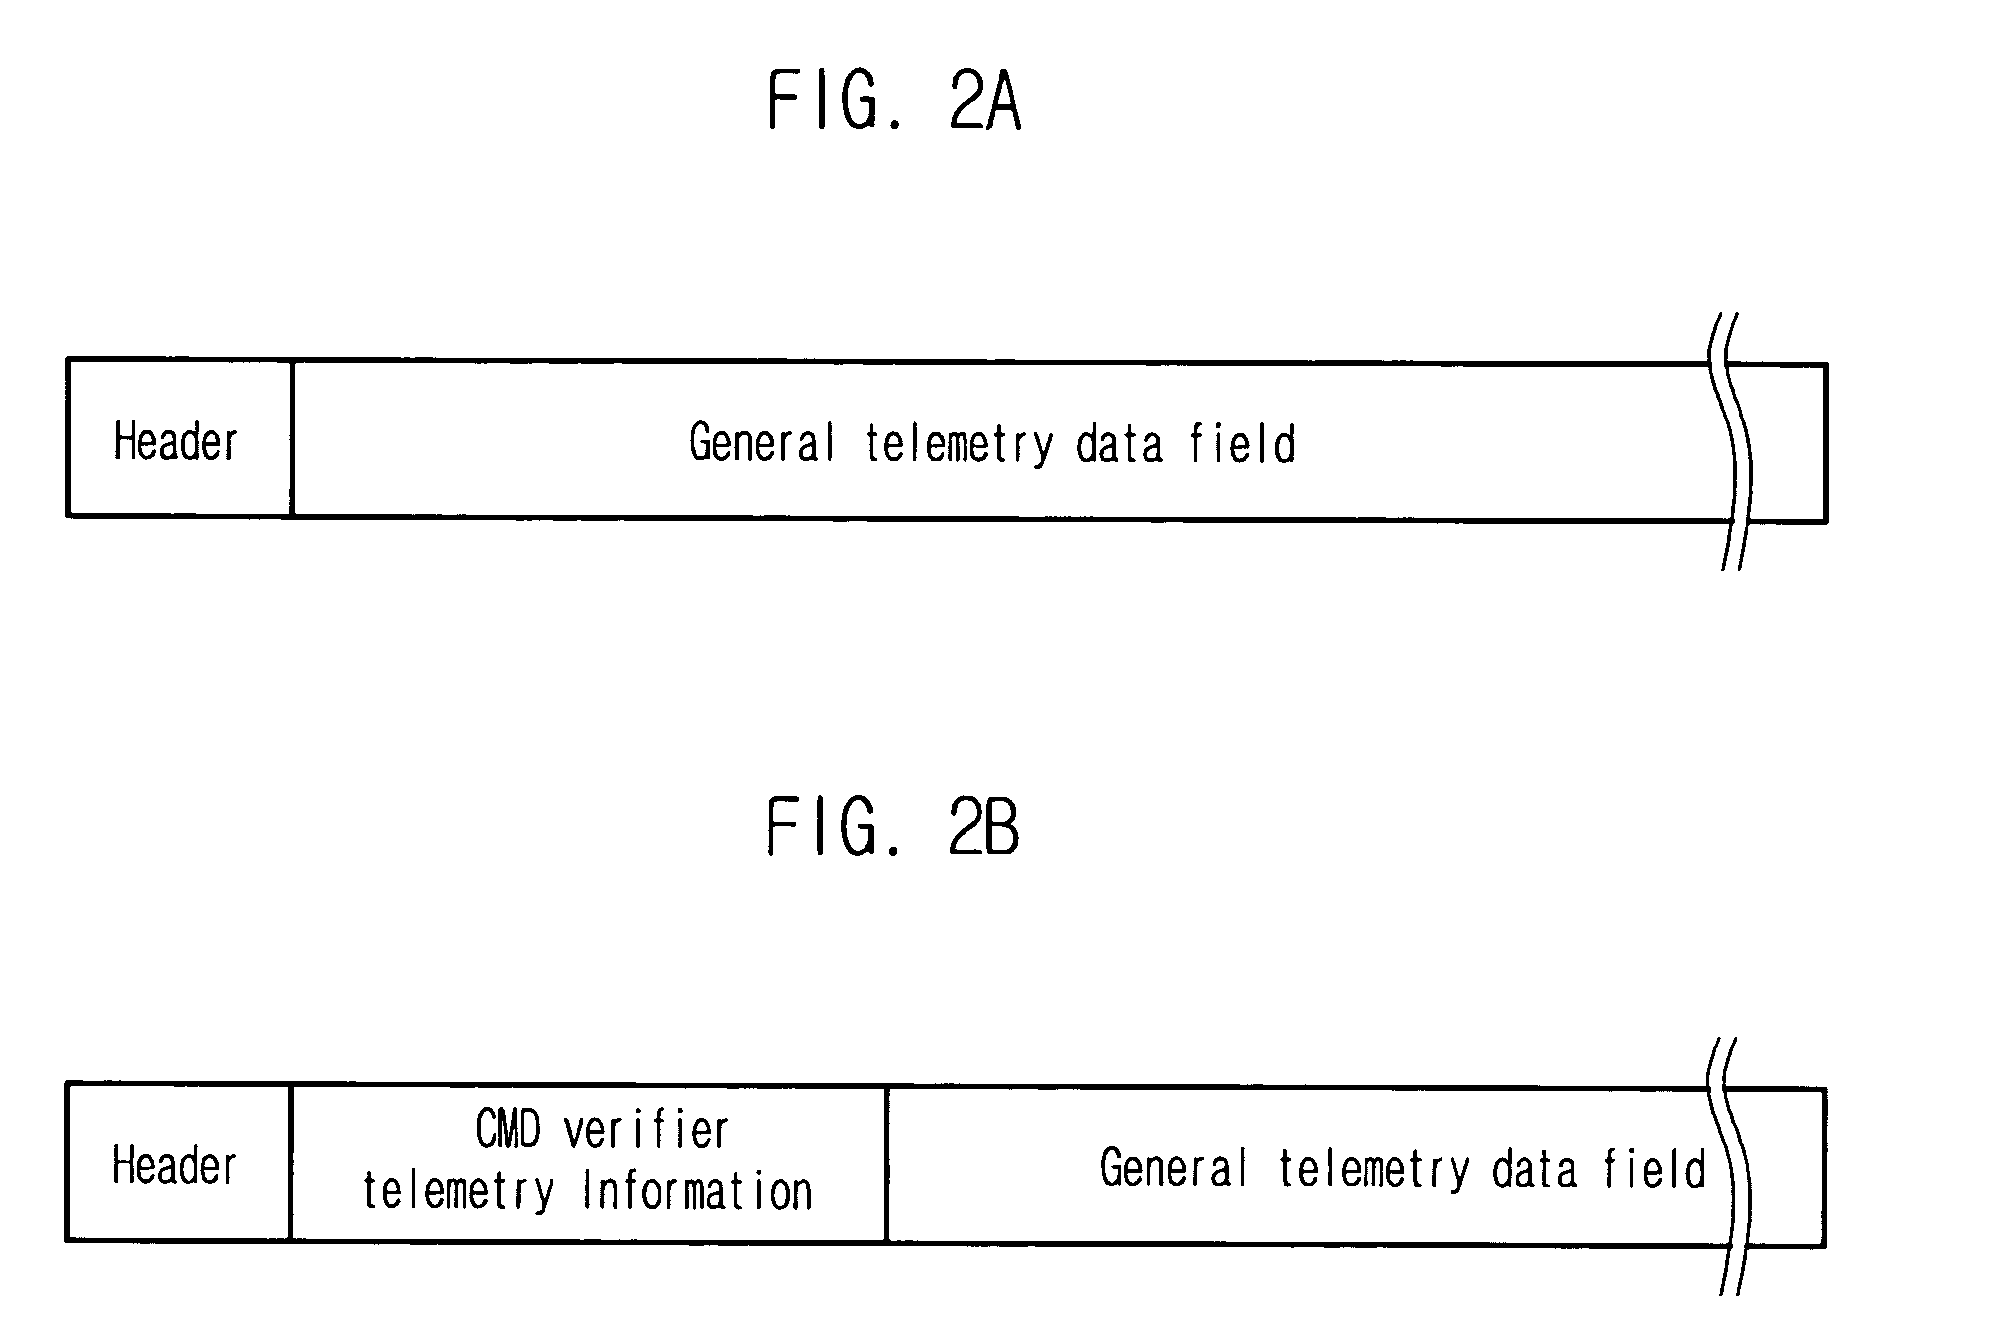 Apparatus and method for verifying reception and execution status of telecommand in satellite control system